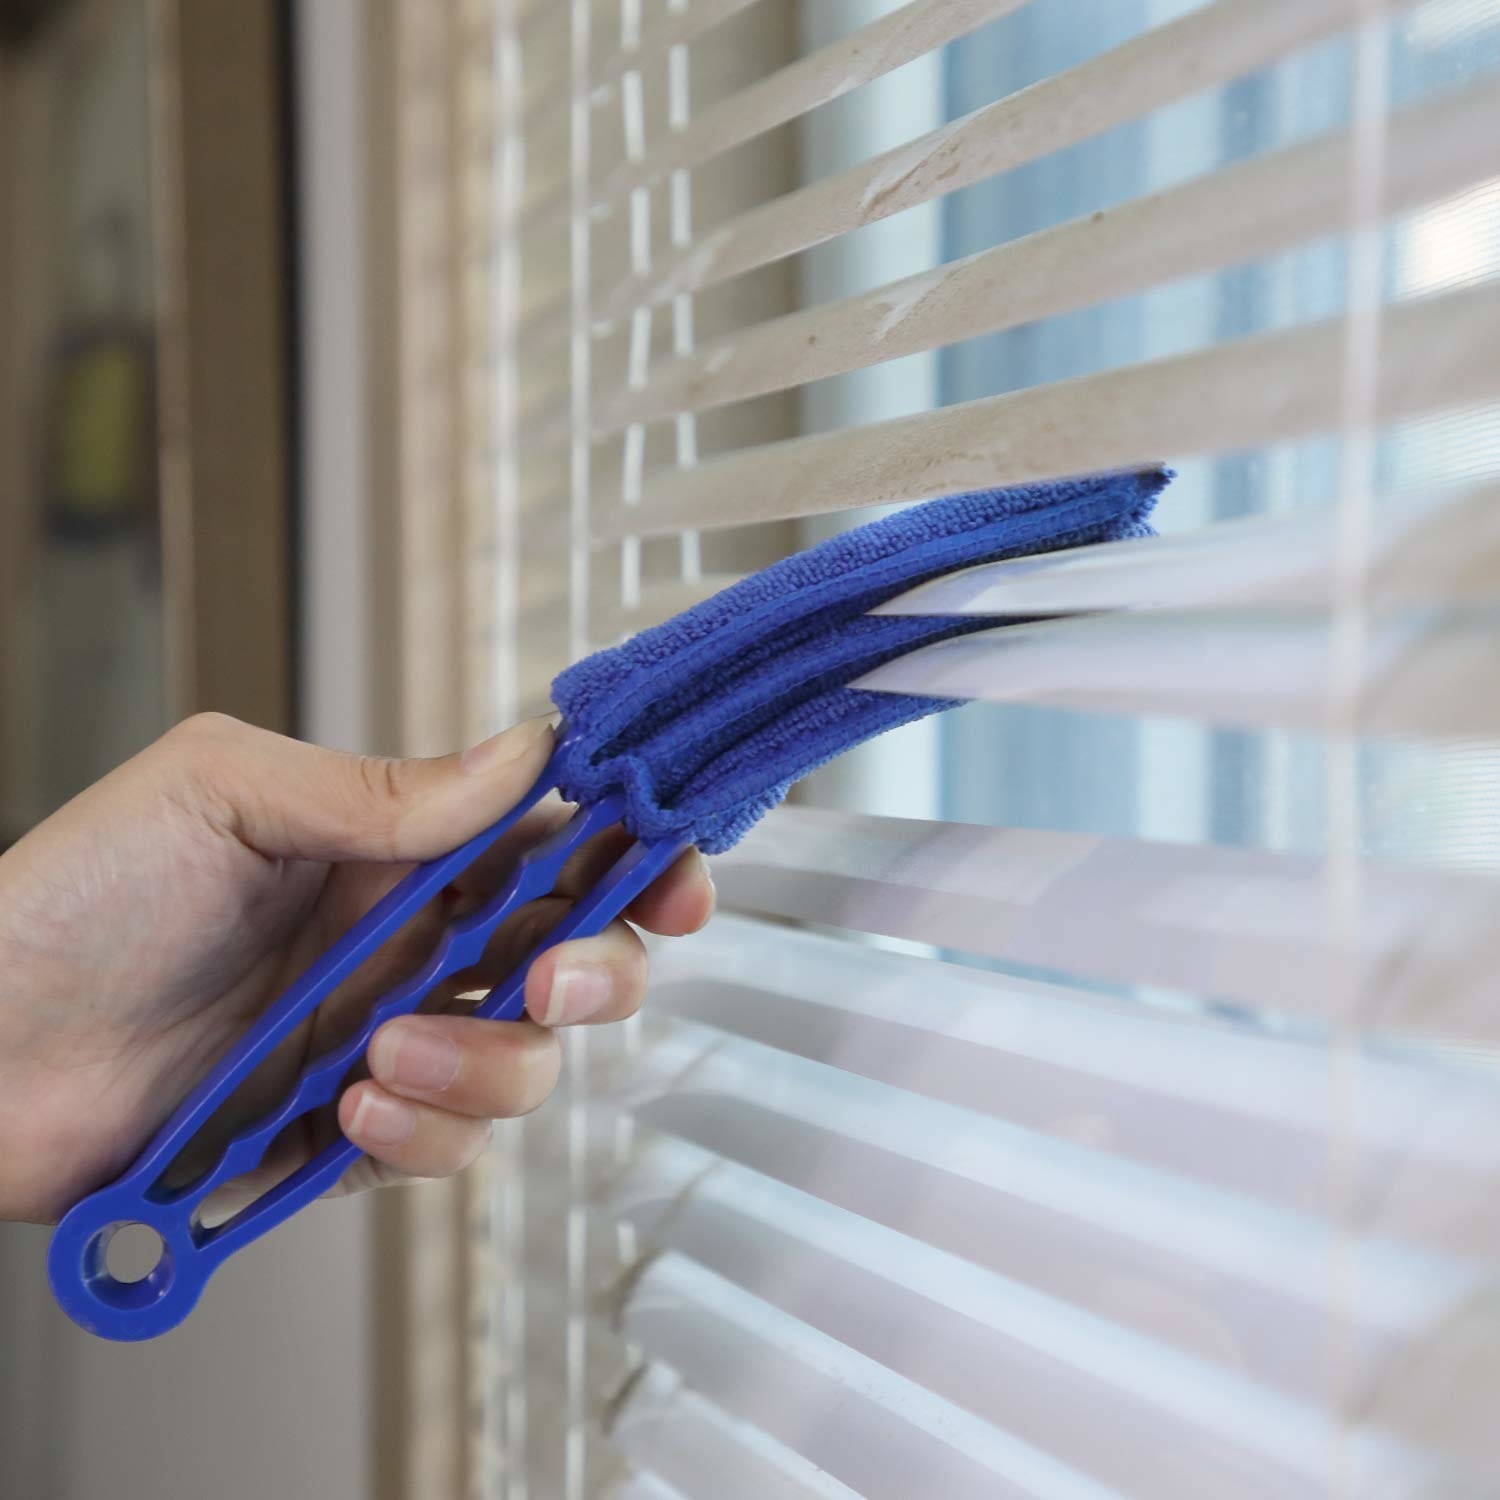 A hand using the three-pronged tool — with each part covered in microfiber — to reach in between blinds